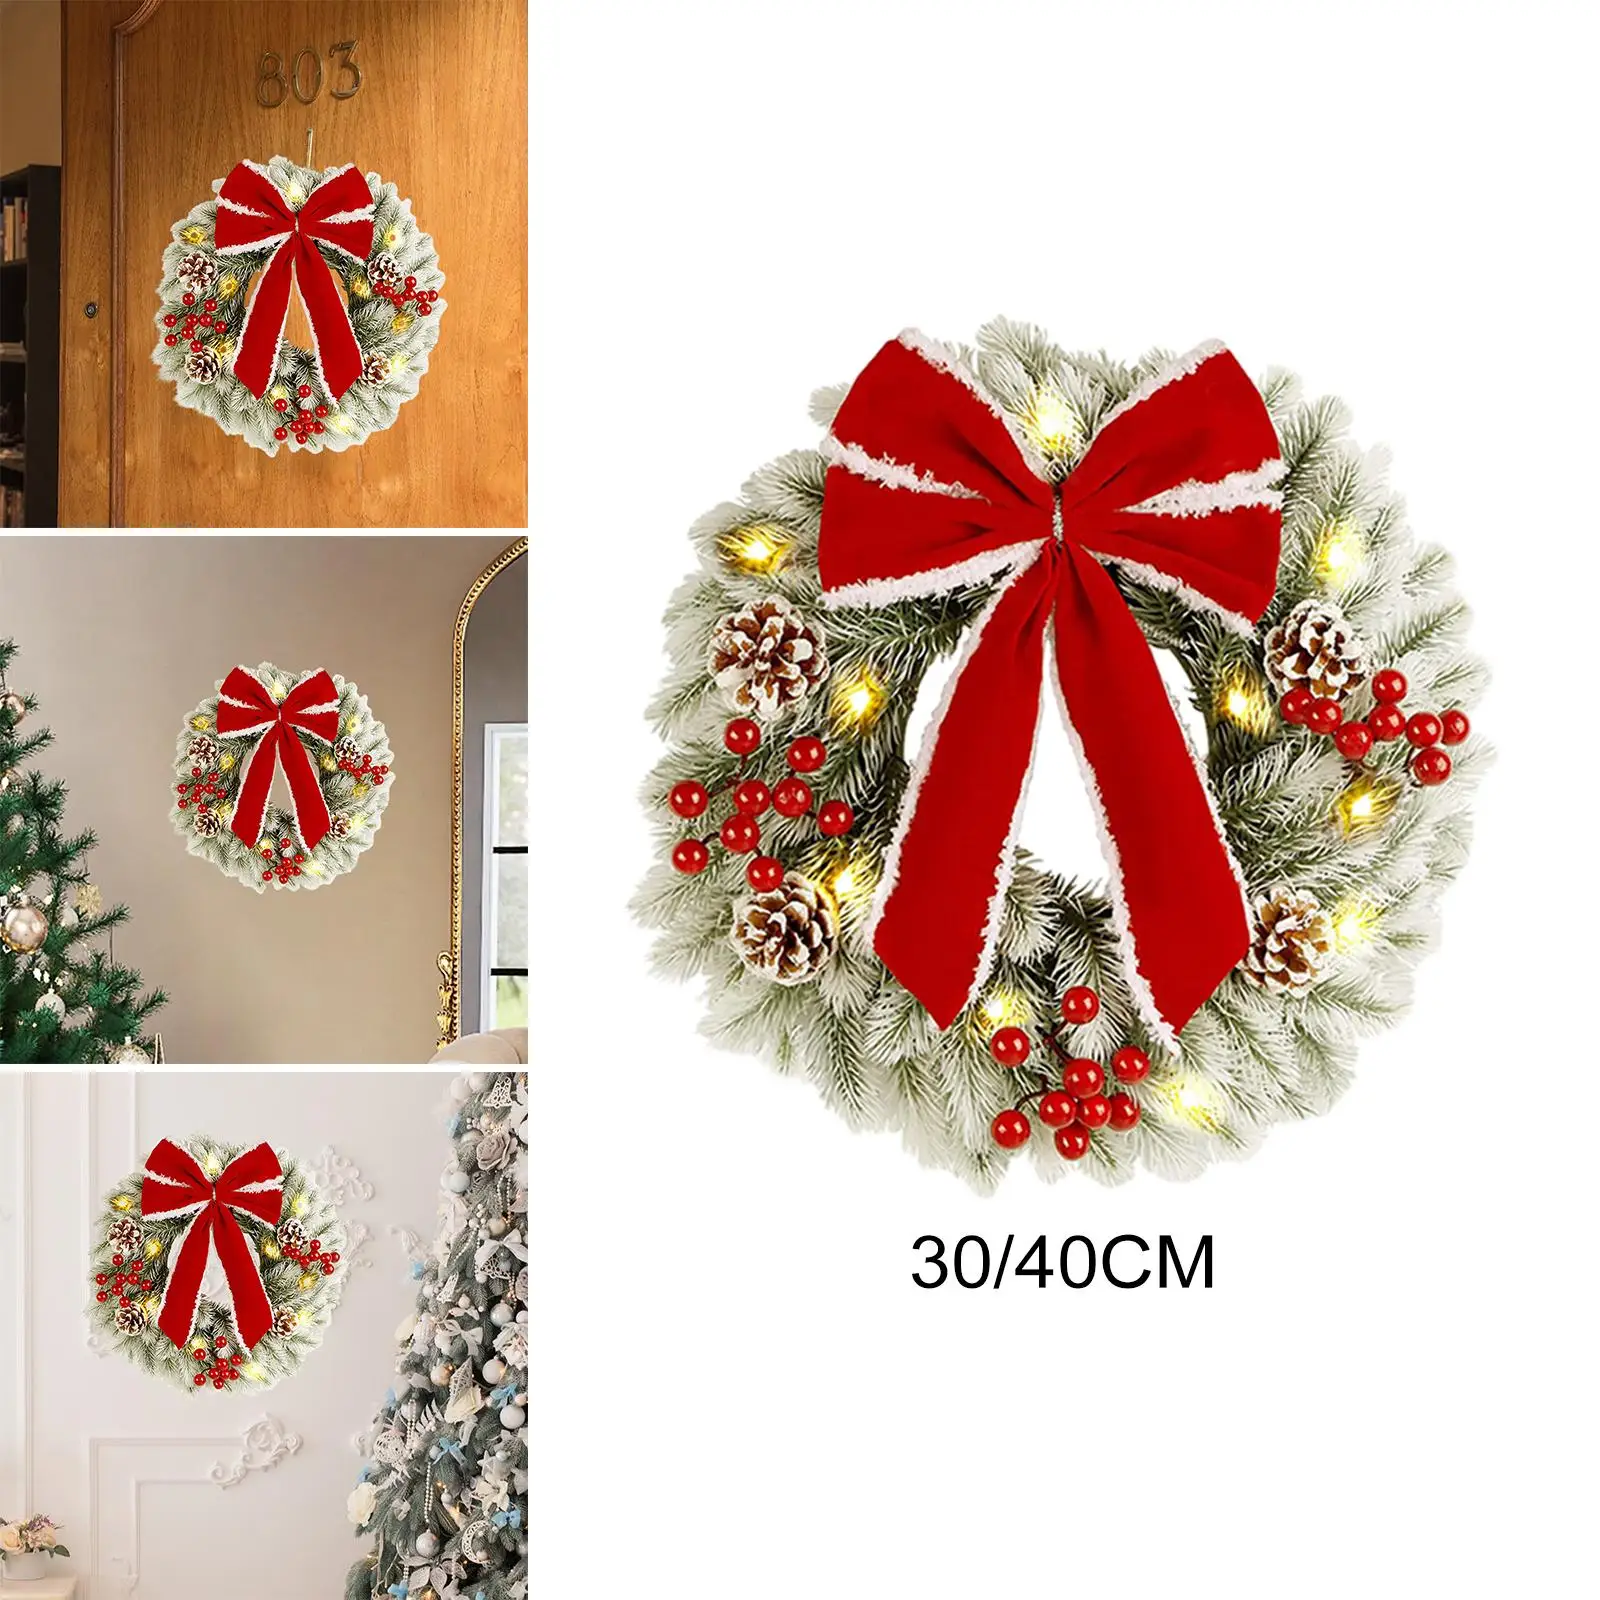 Christmas Wreath with String Light Warm White Lighting Decorative Door Ornaments for Office Wall Party Indoor Outdoor Ornament